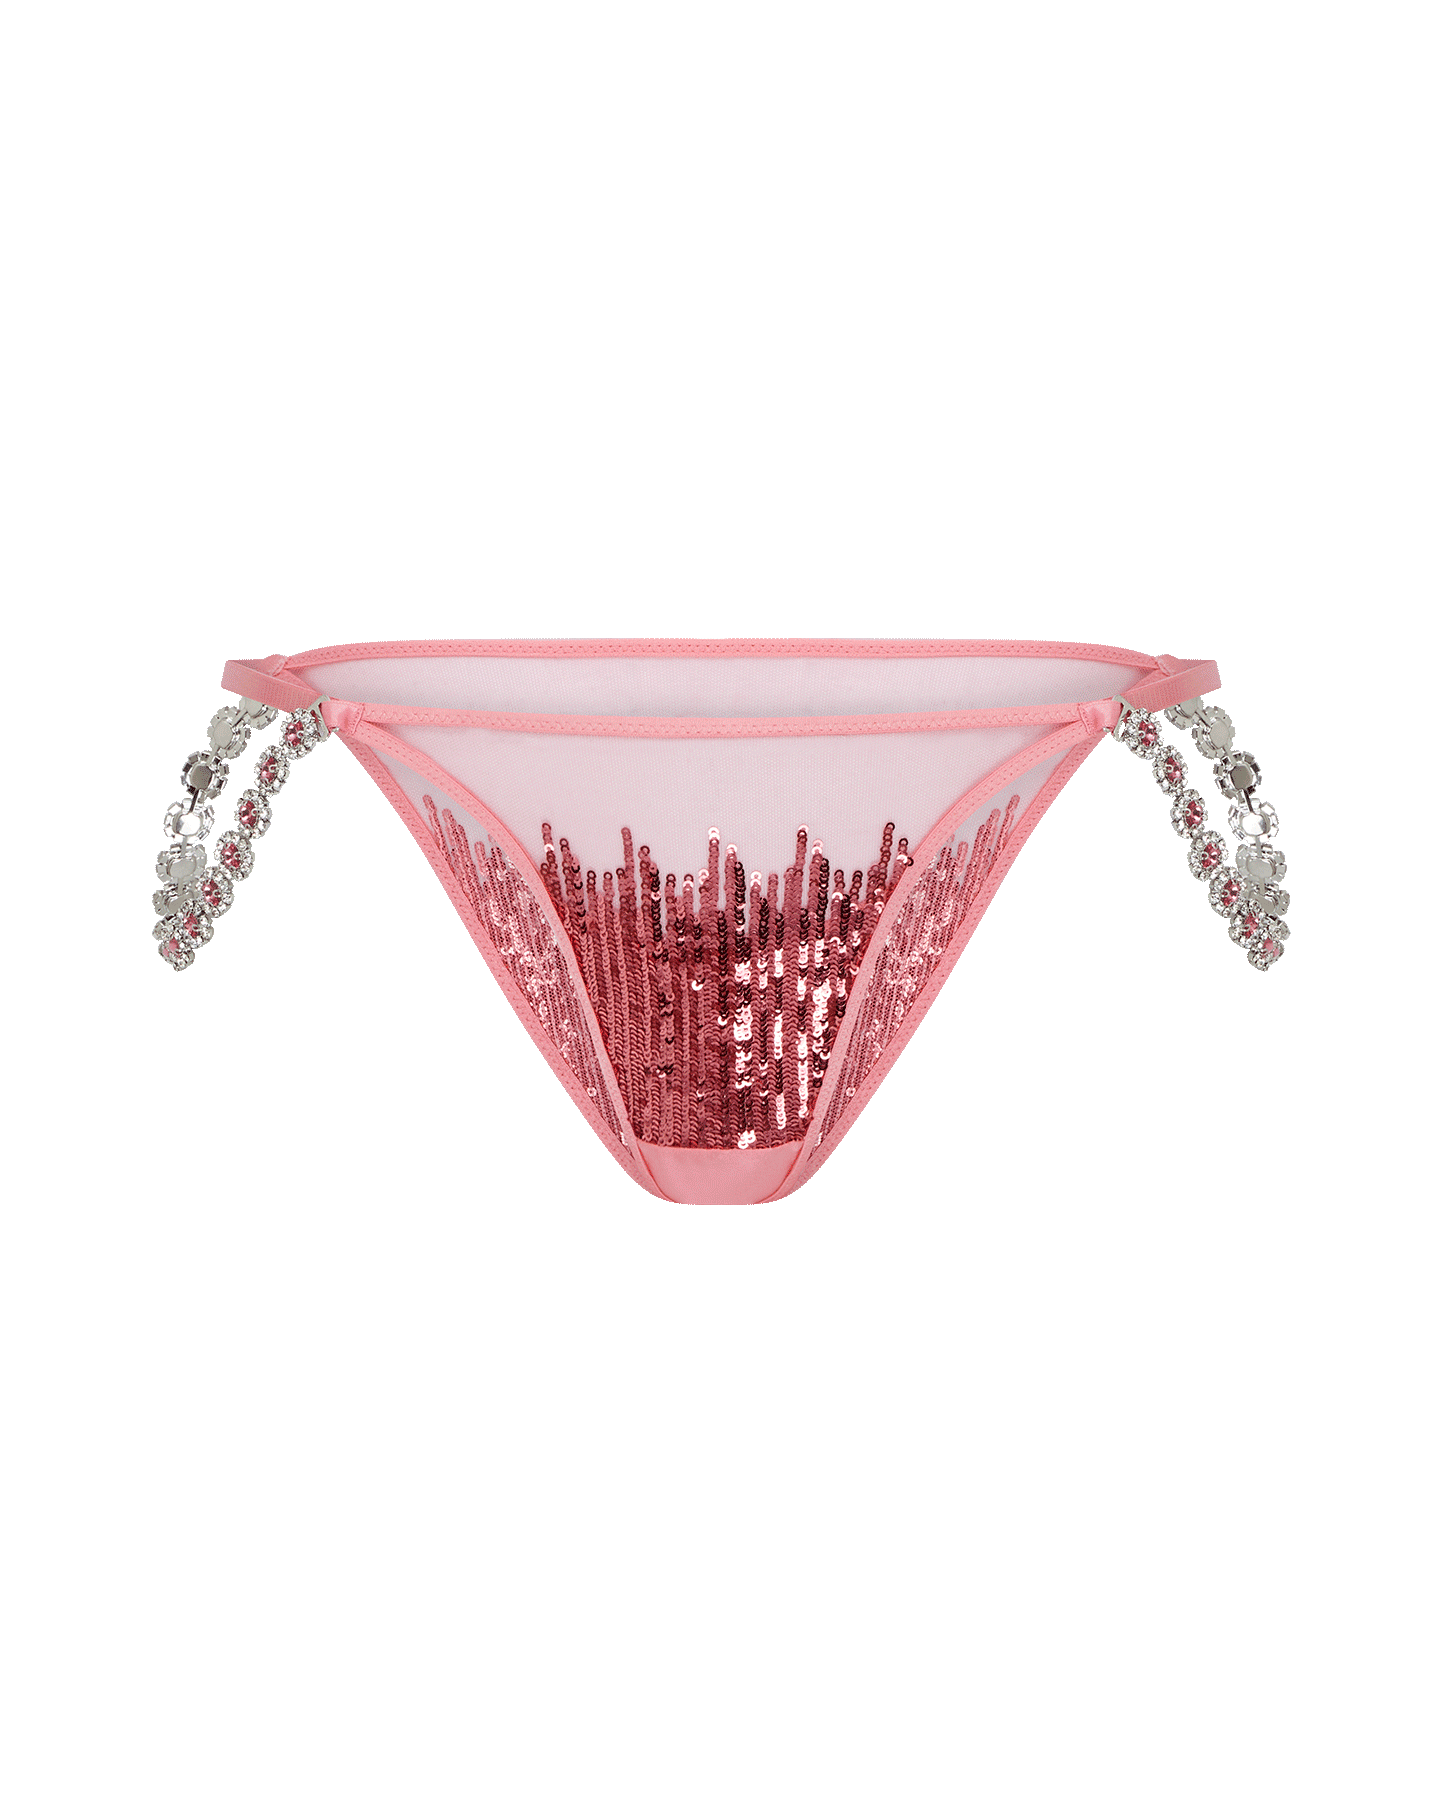 Calista Brazilian Brief in Pink/Silver | By Agent Provocateur